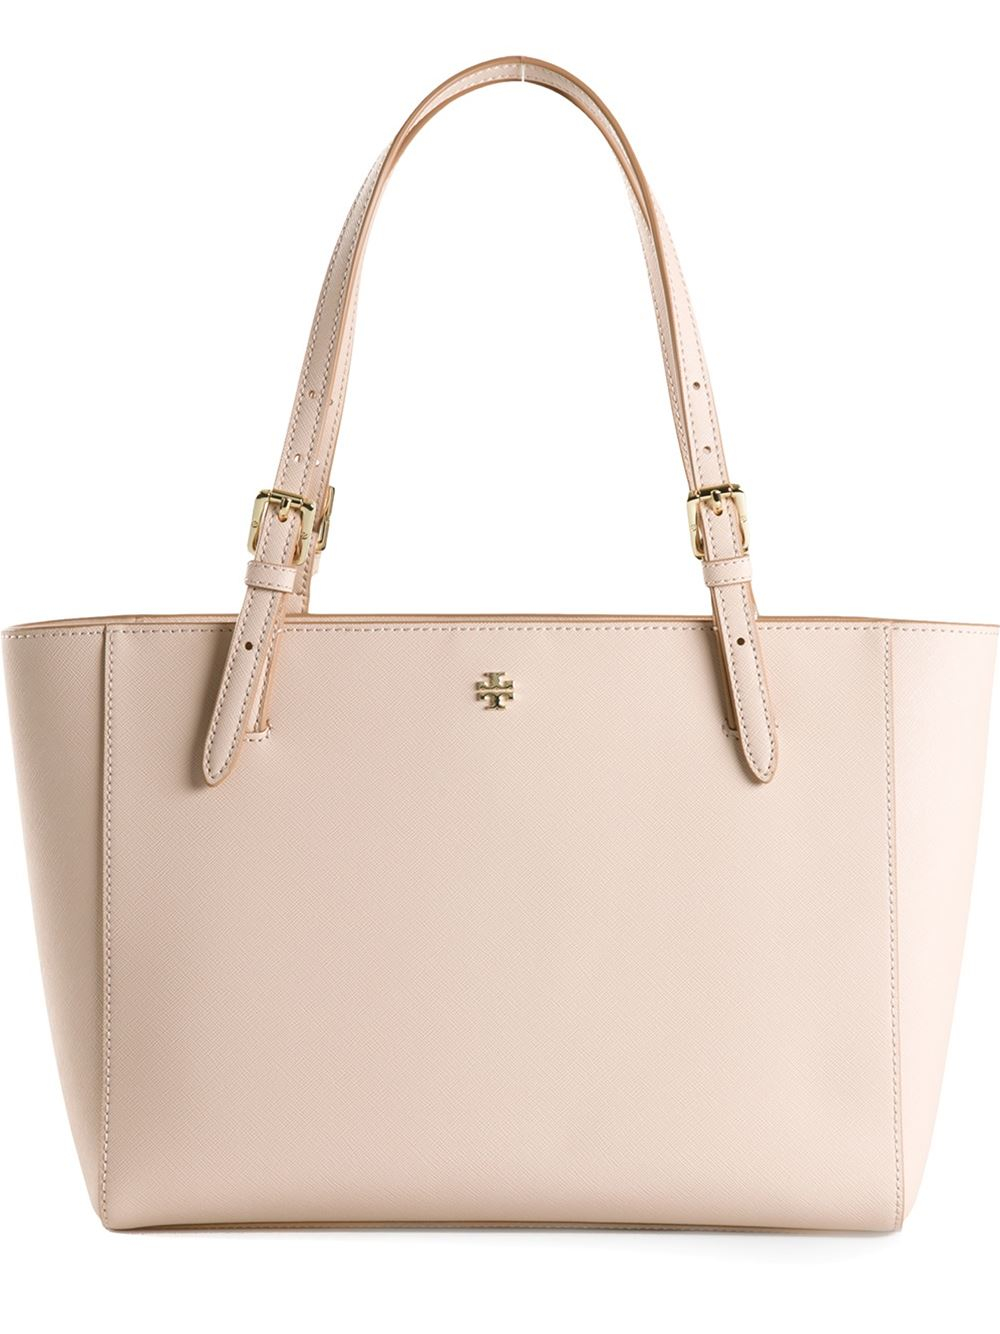 Tory Burch 'York' Buckle Tote in Pink | Lyst